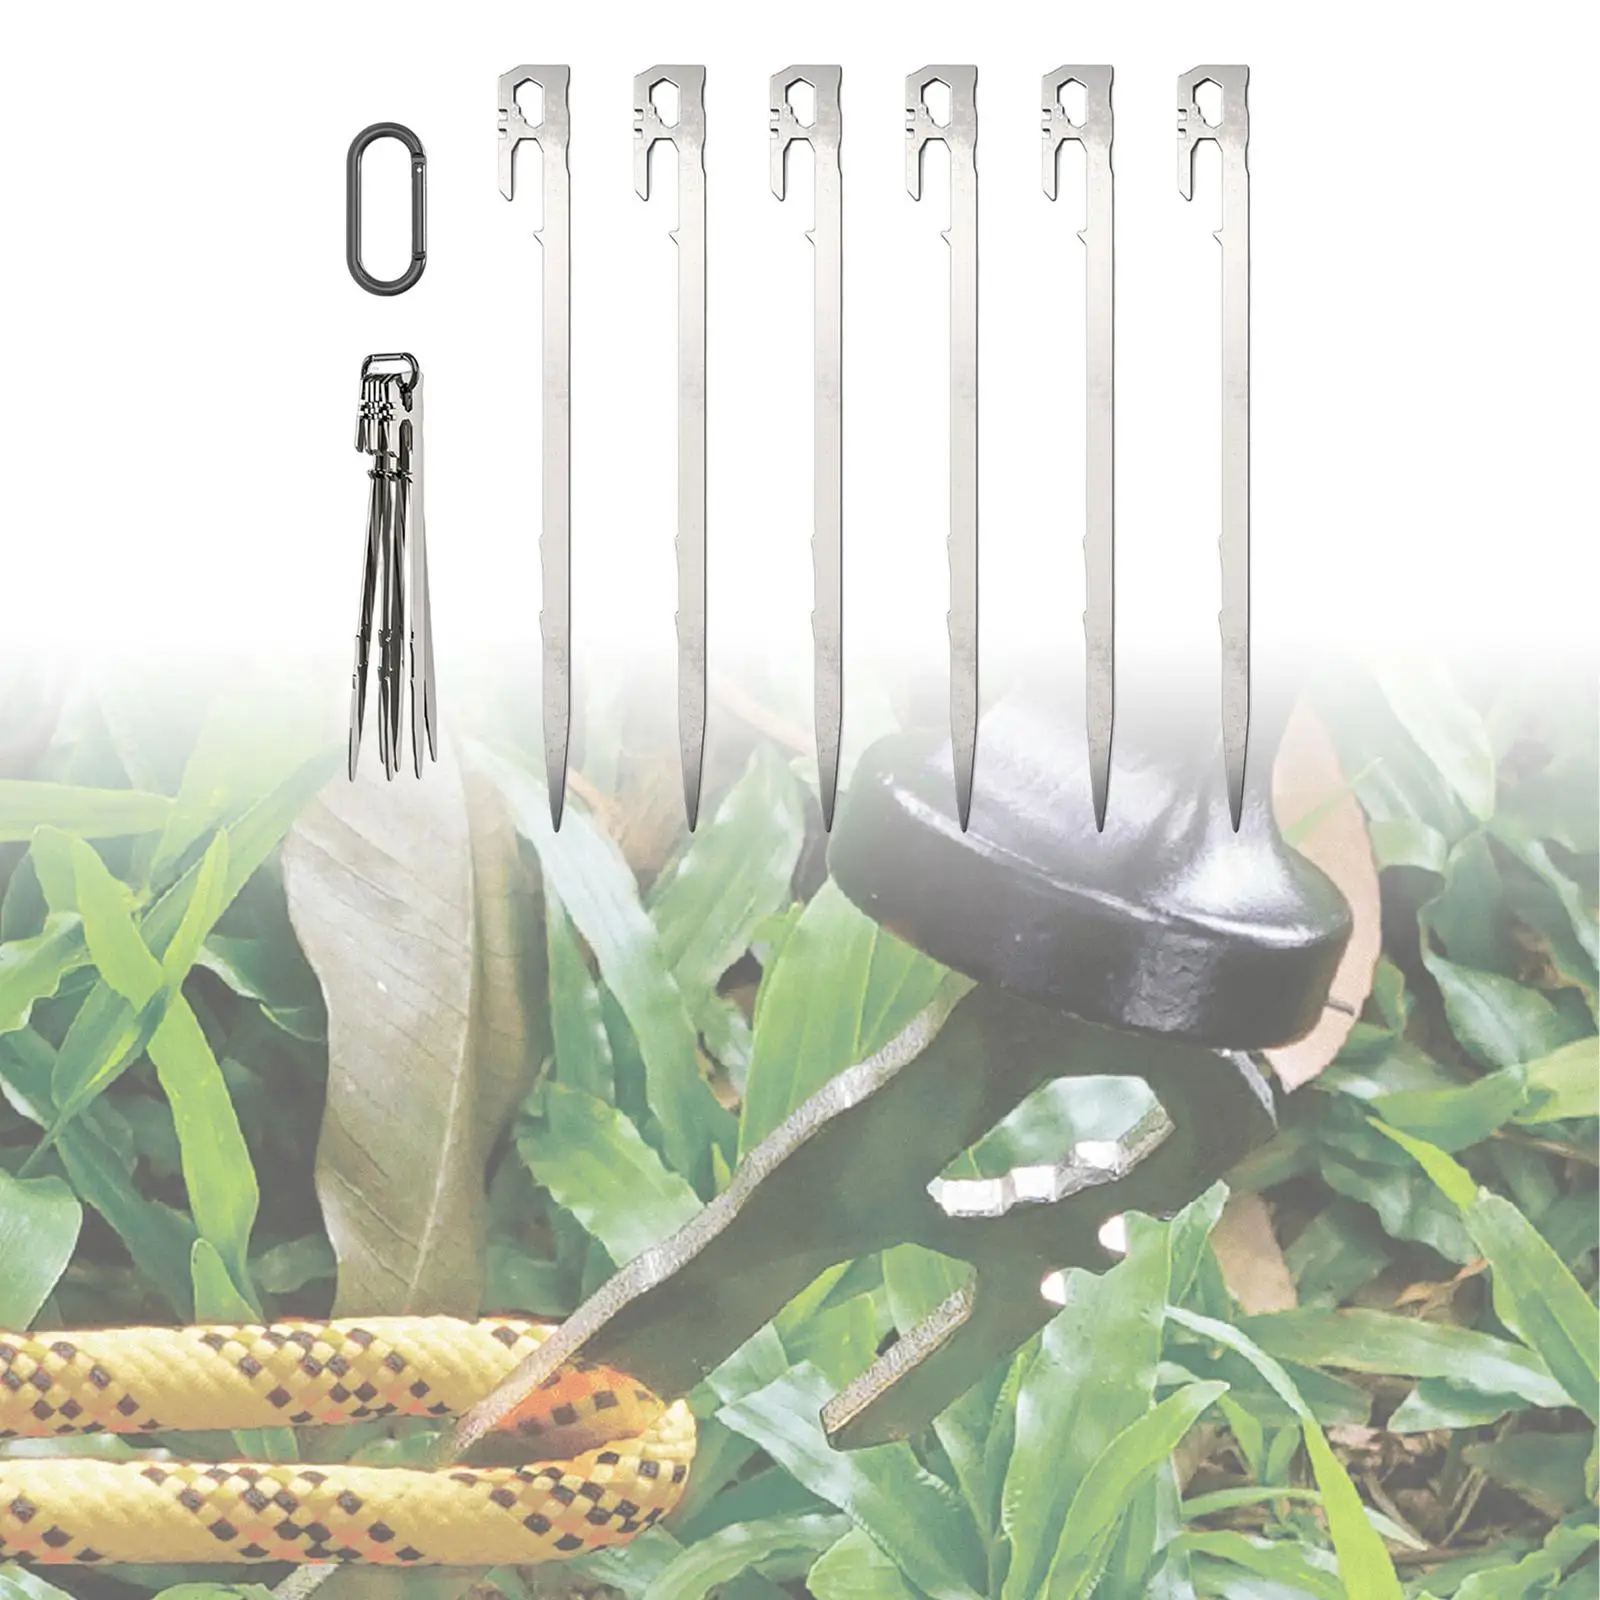 Tent Stakes Pegs Ground Nails Windproof Quick Hanging Steel Ground Anchoring Pegs for Garden Canopy